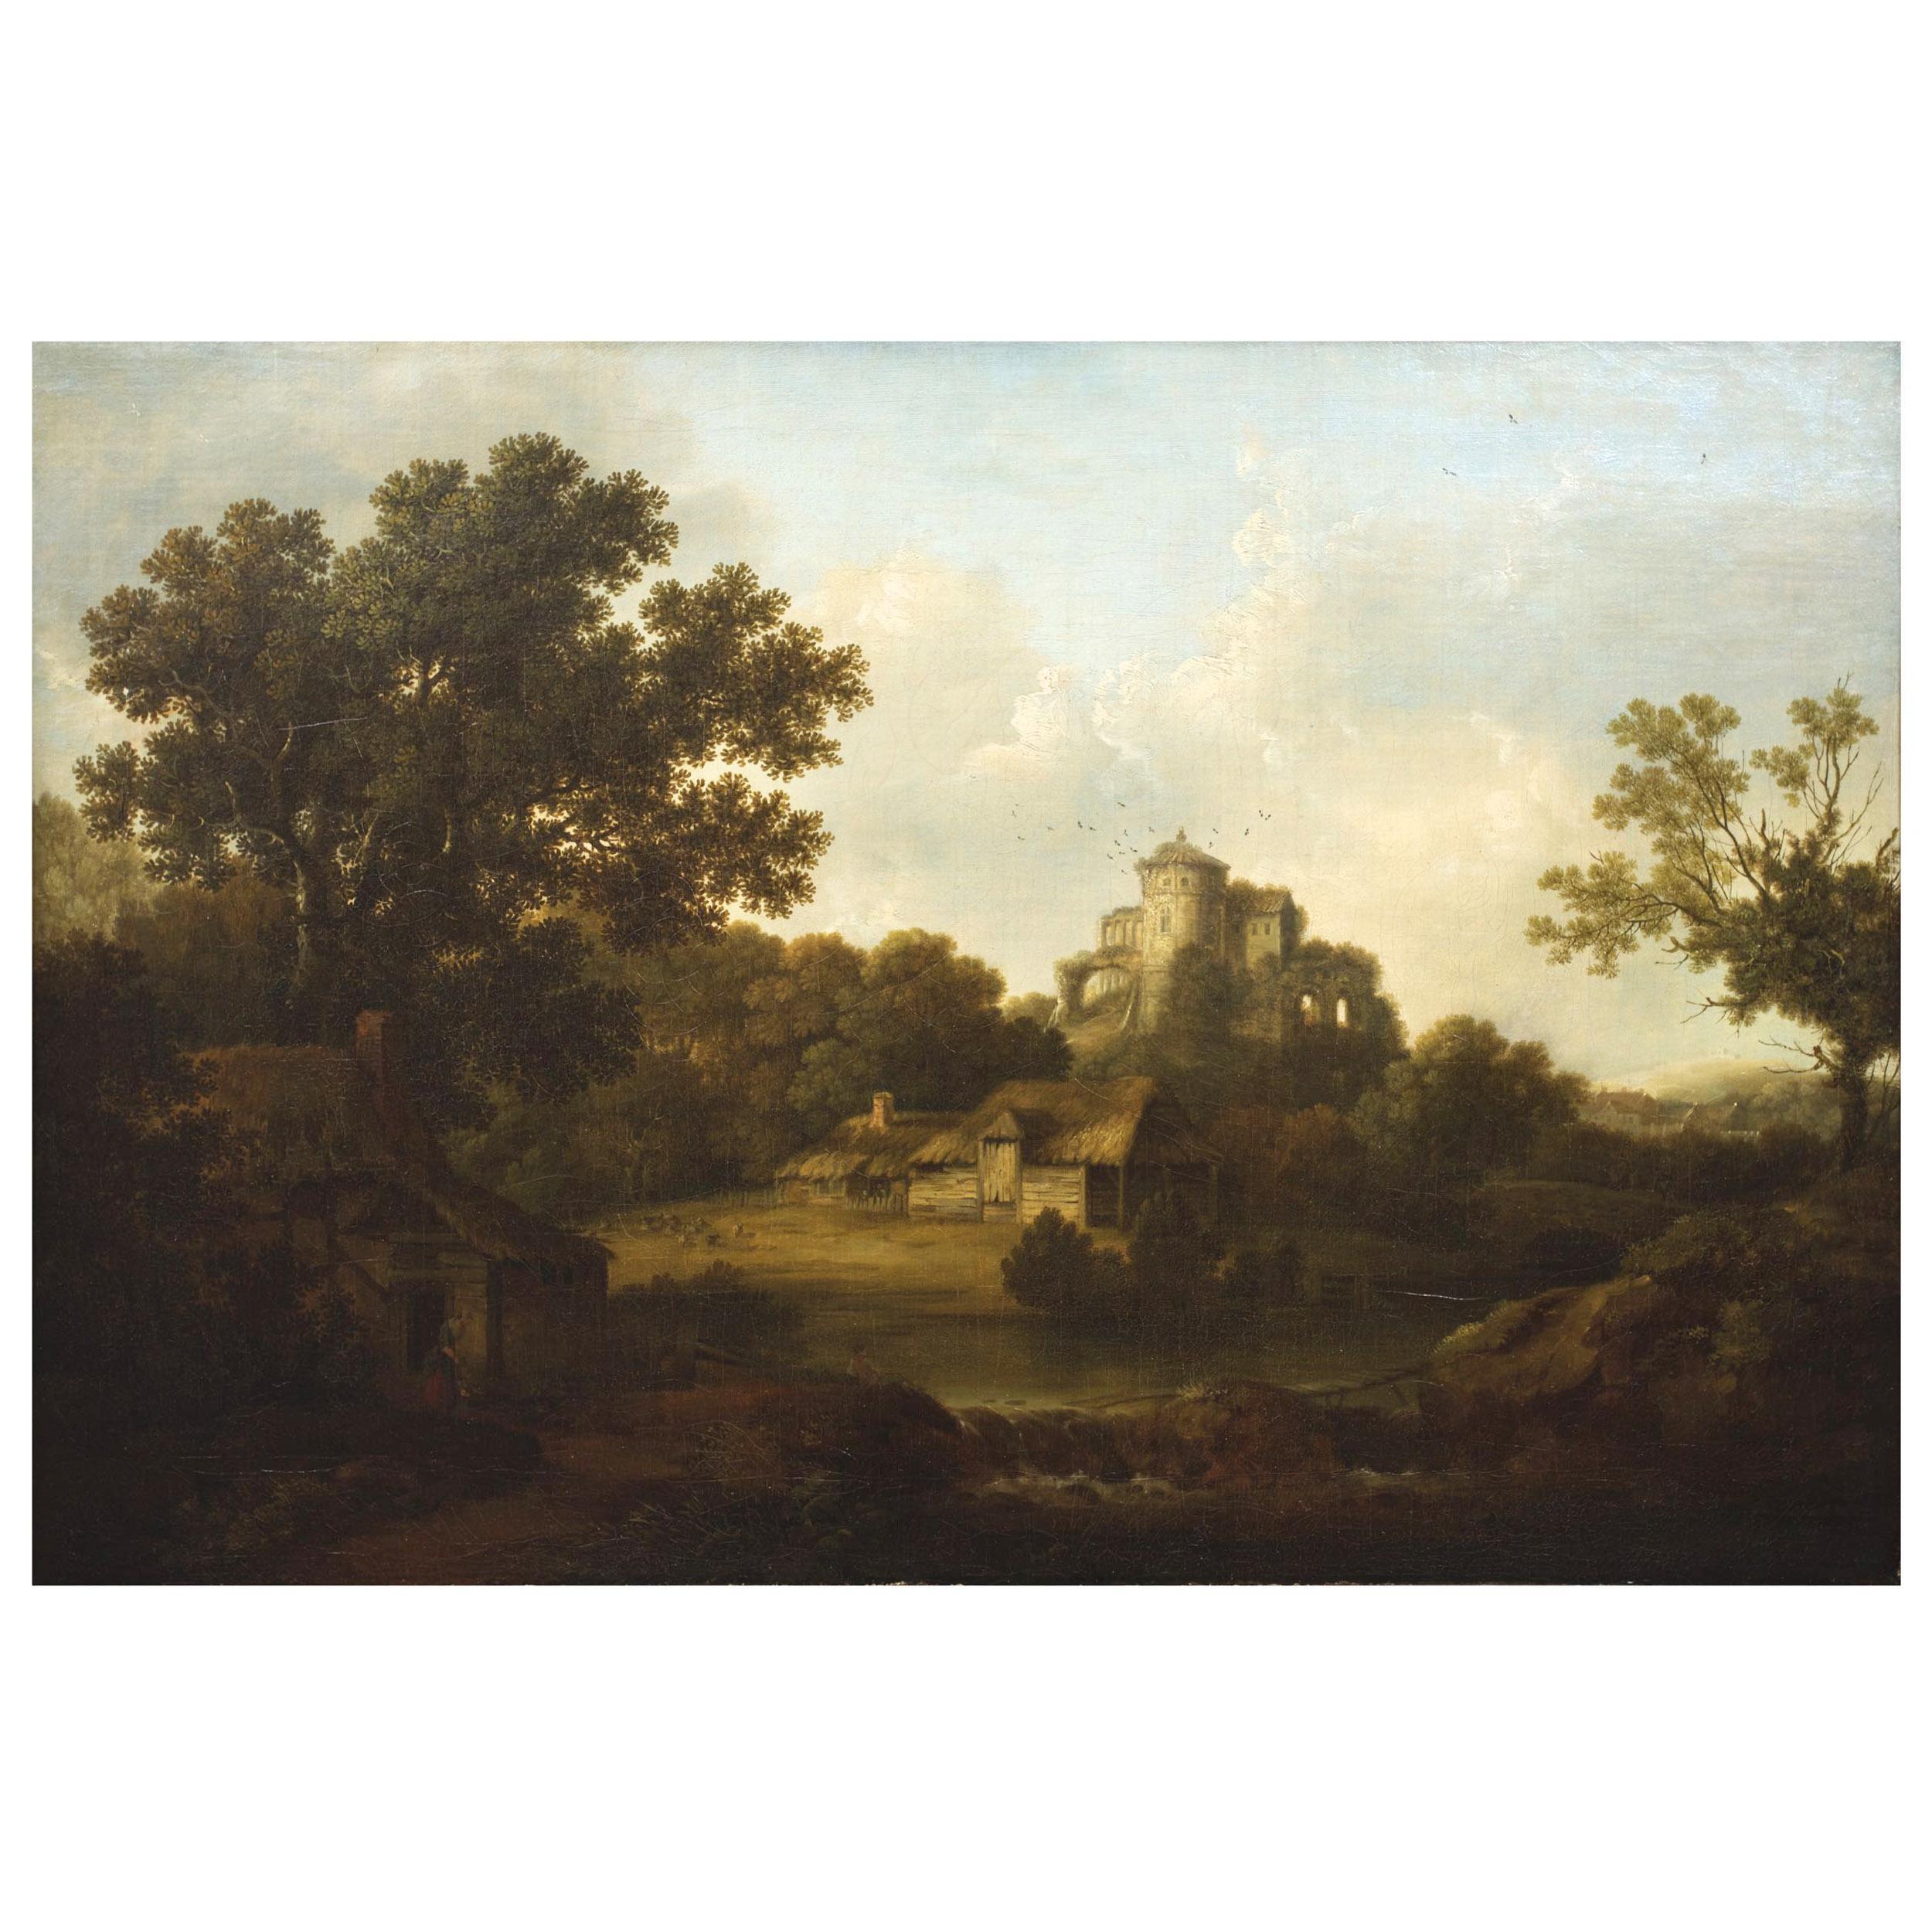 An exquisite landscape depicting a quaint rural farm with a young woman and her daughter playing with their dog before a calm pool of water where a figure rests on the bank; the thatched roof residence across the water shows two figures inside of